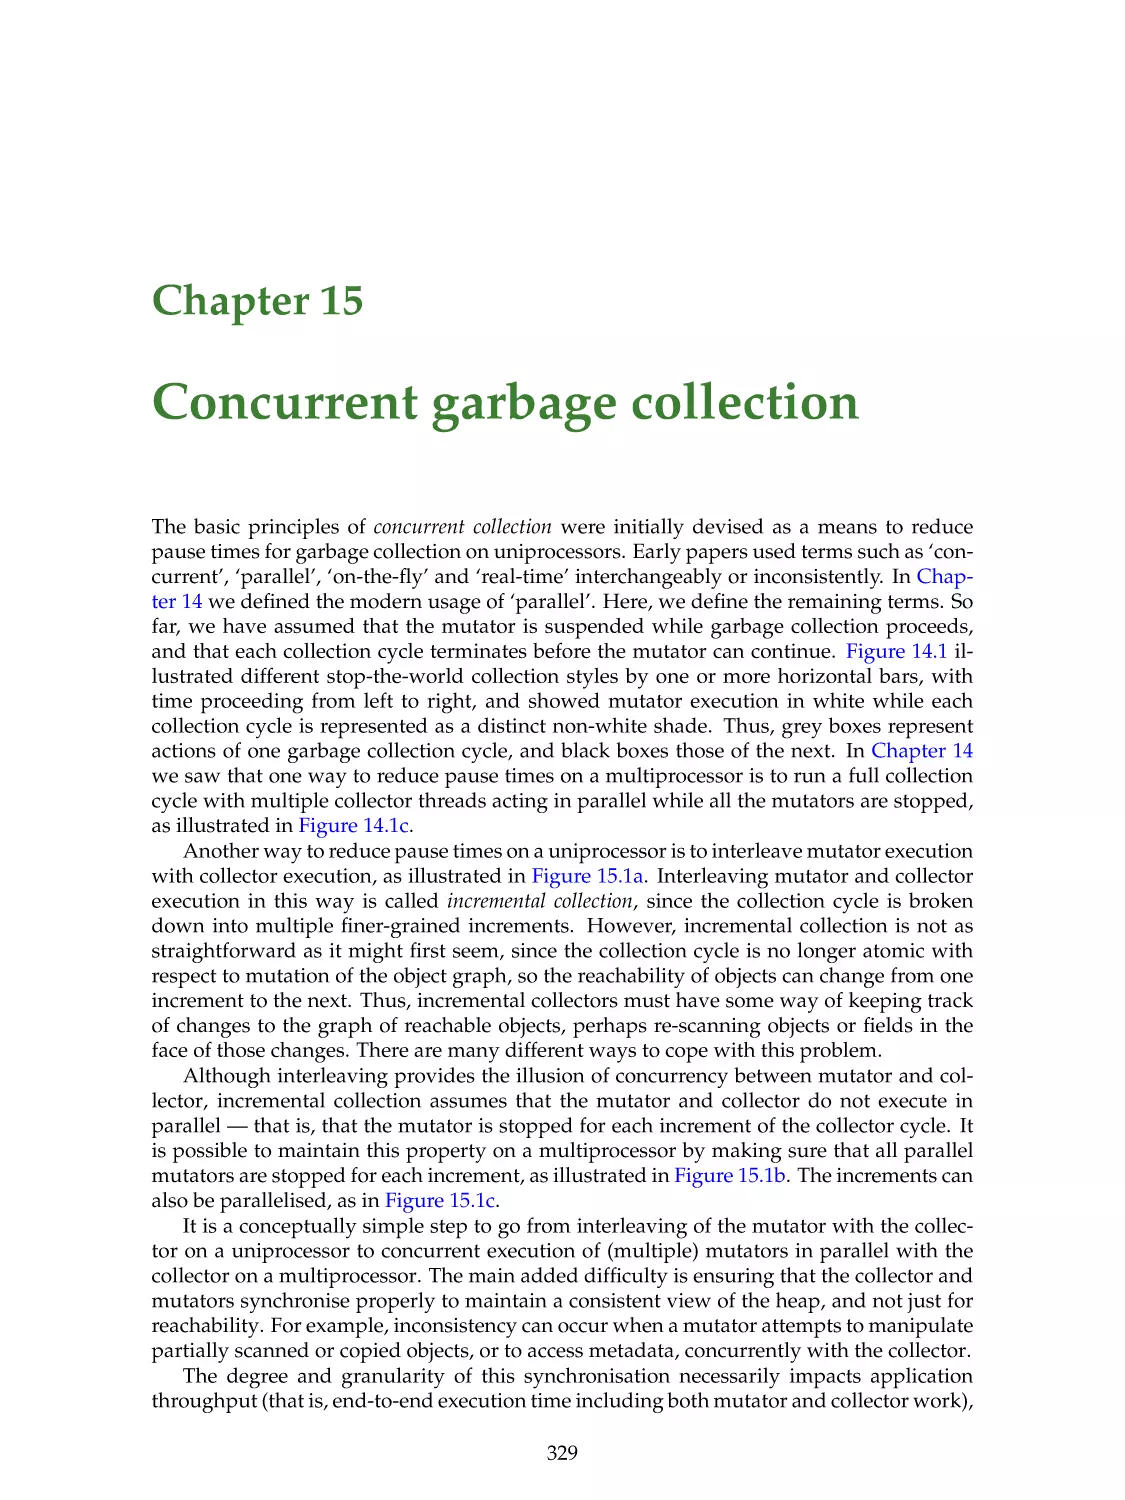 15. Concurrent garbage collection